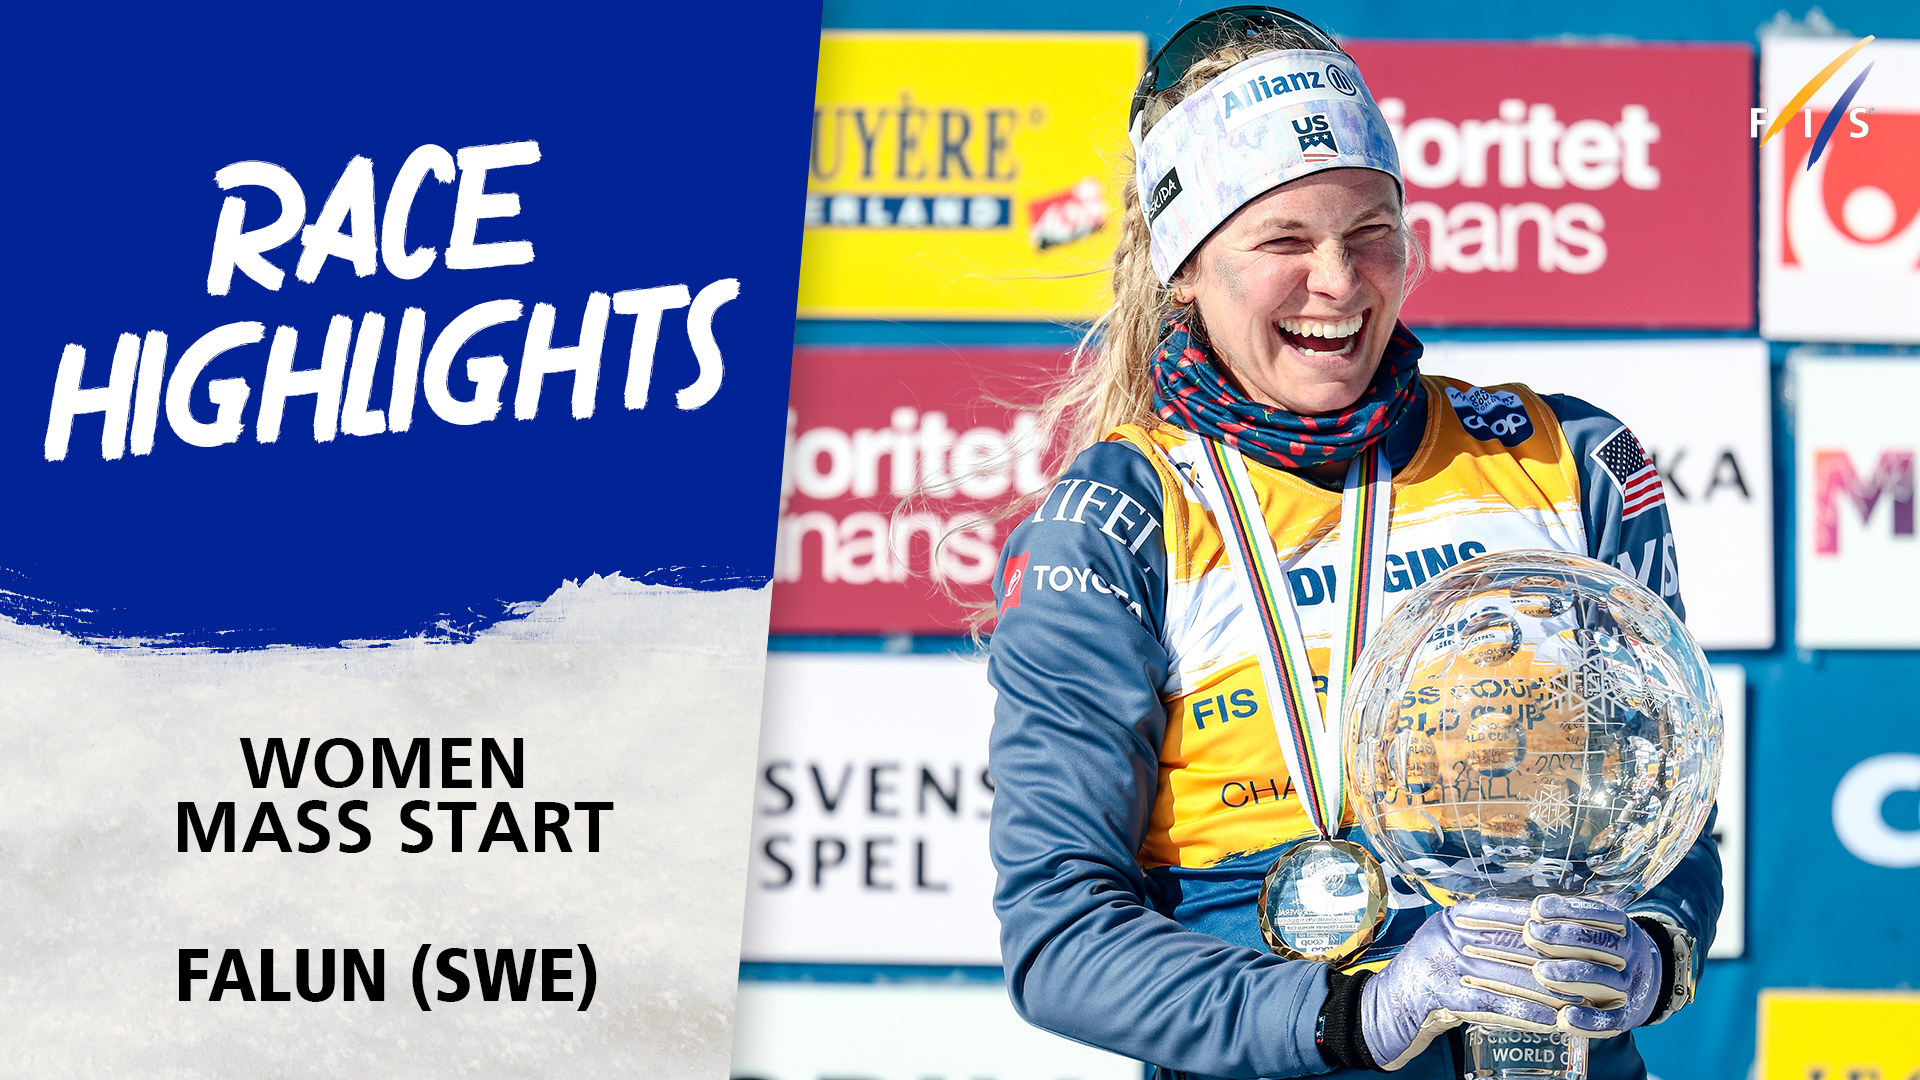 Jessie Diggins crowned World Cup Champion in Falun